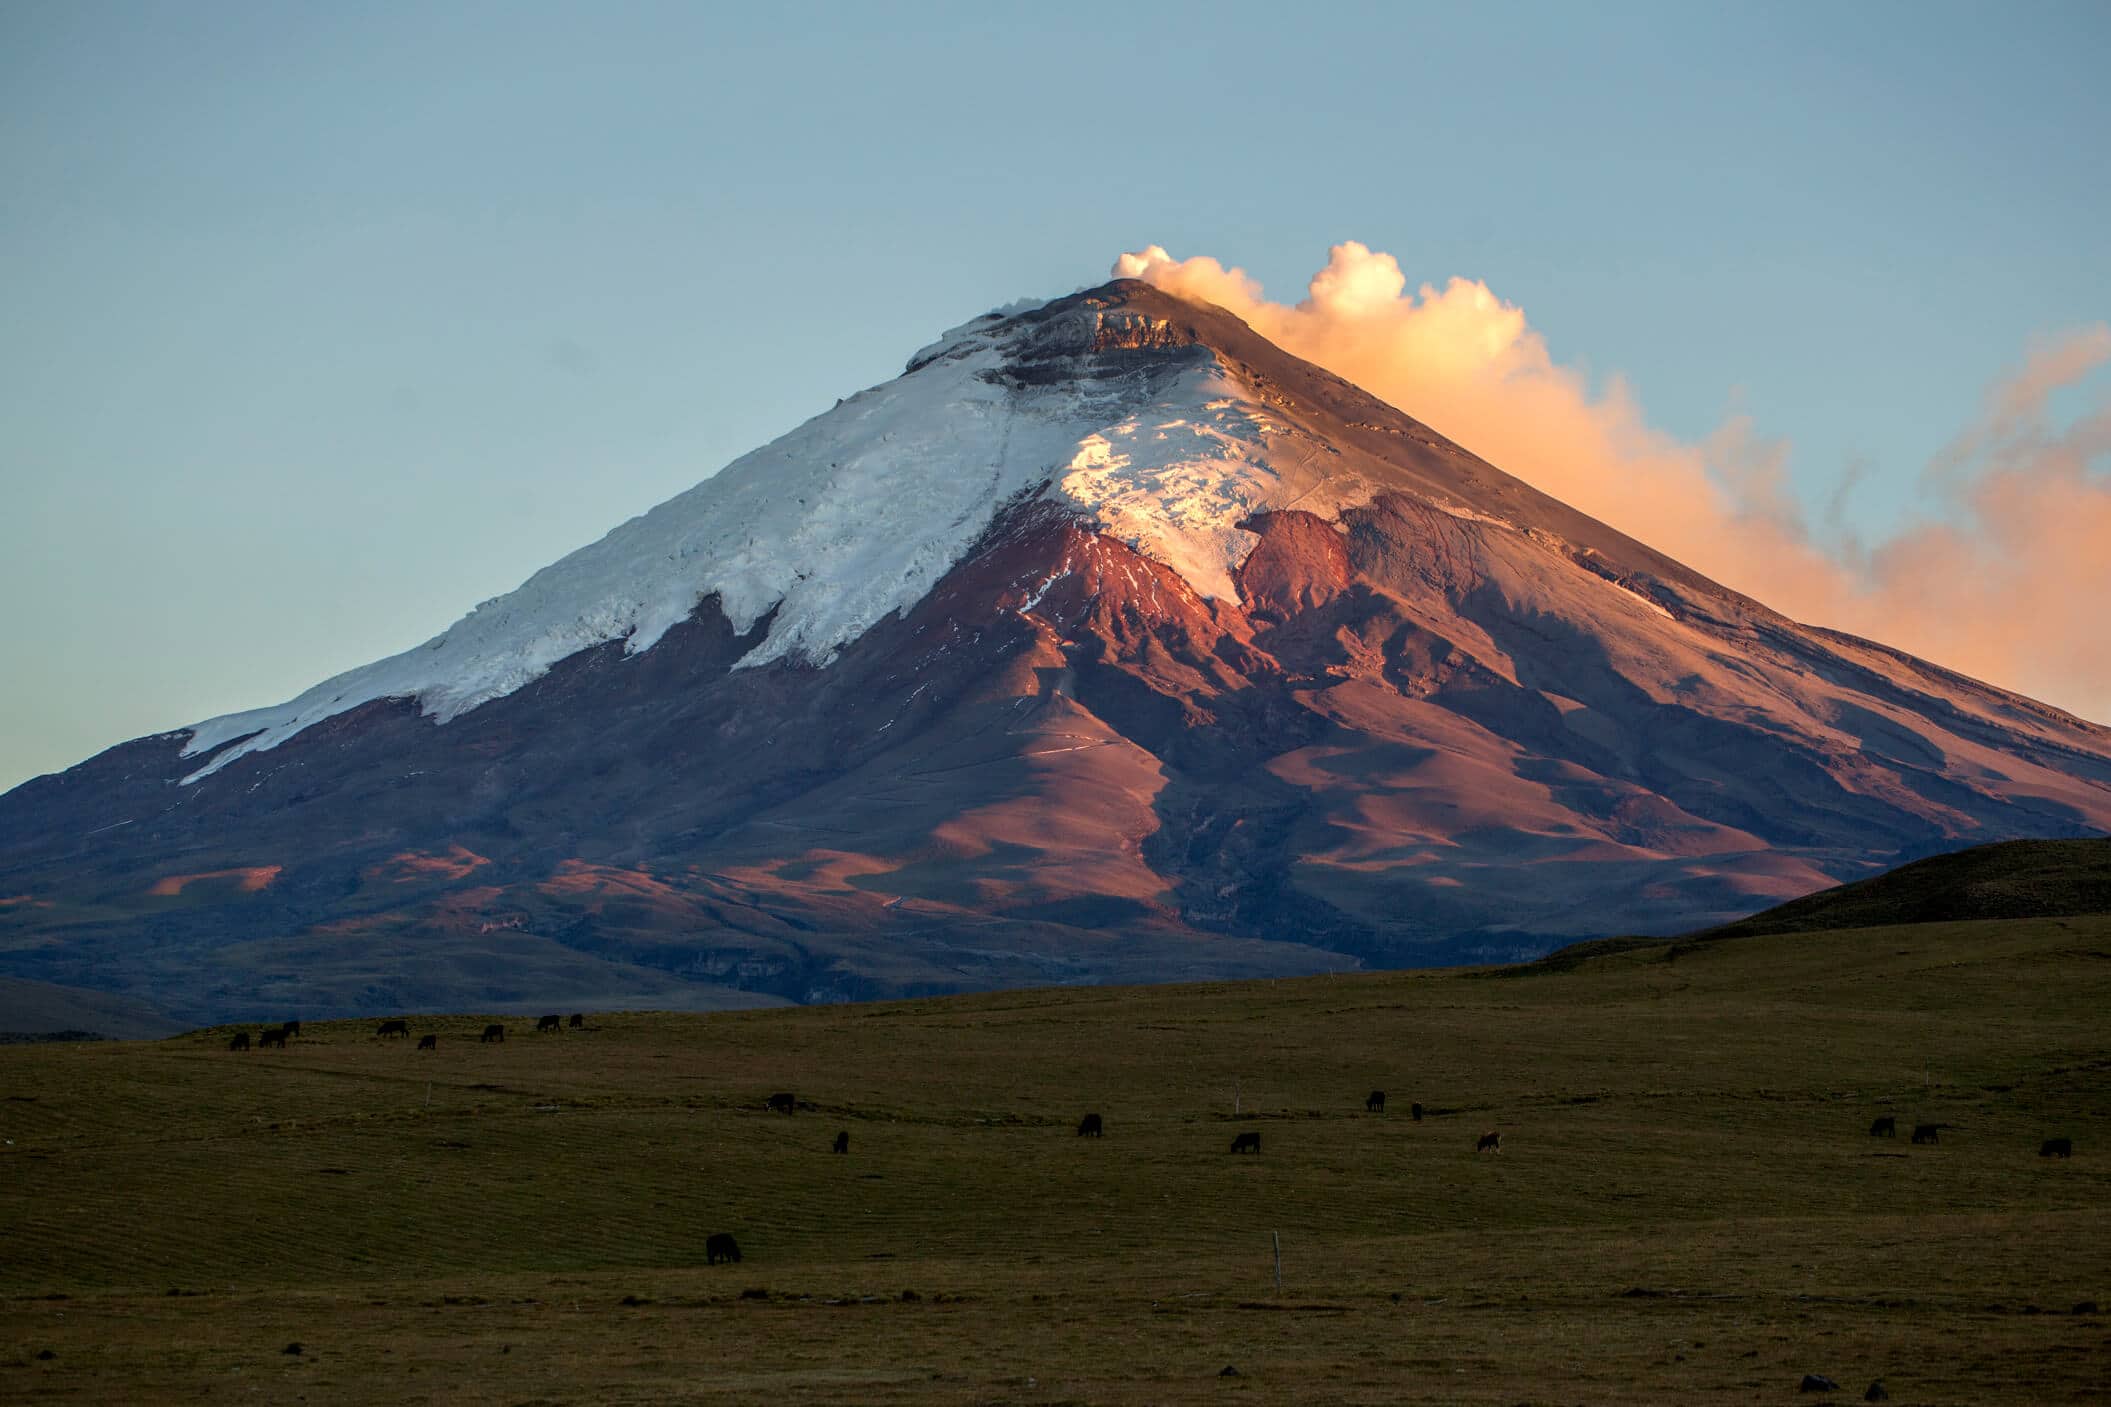 All you need to know about Cotopaxi National Park